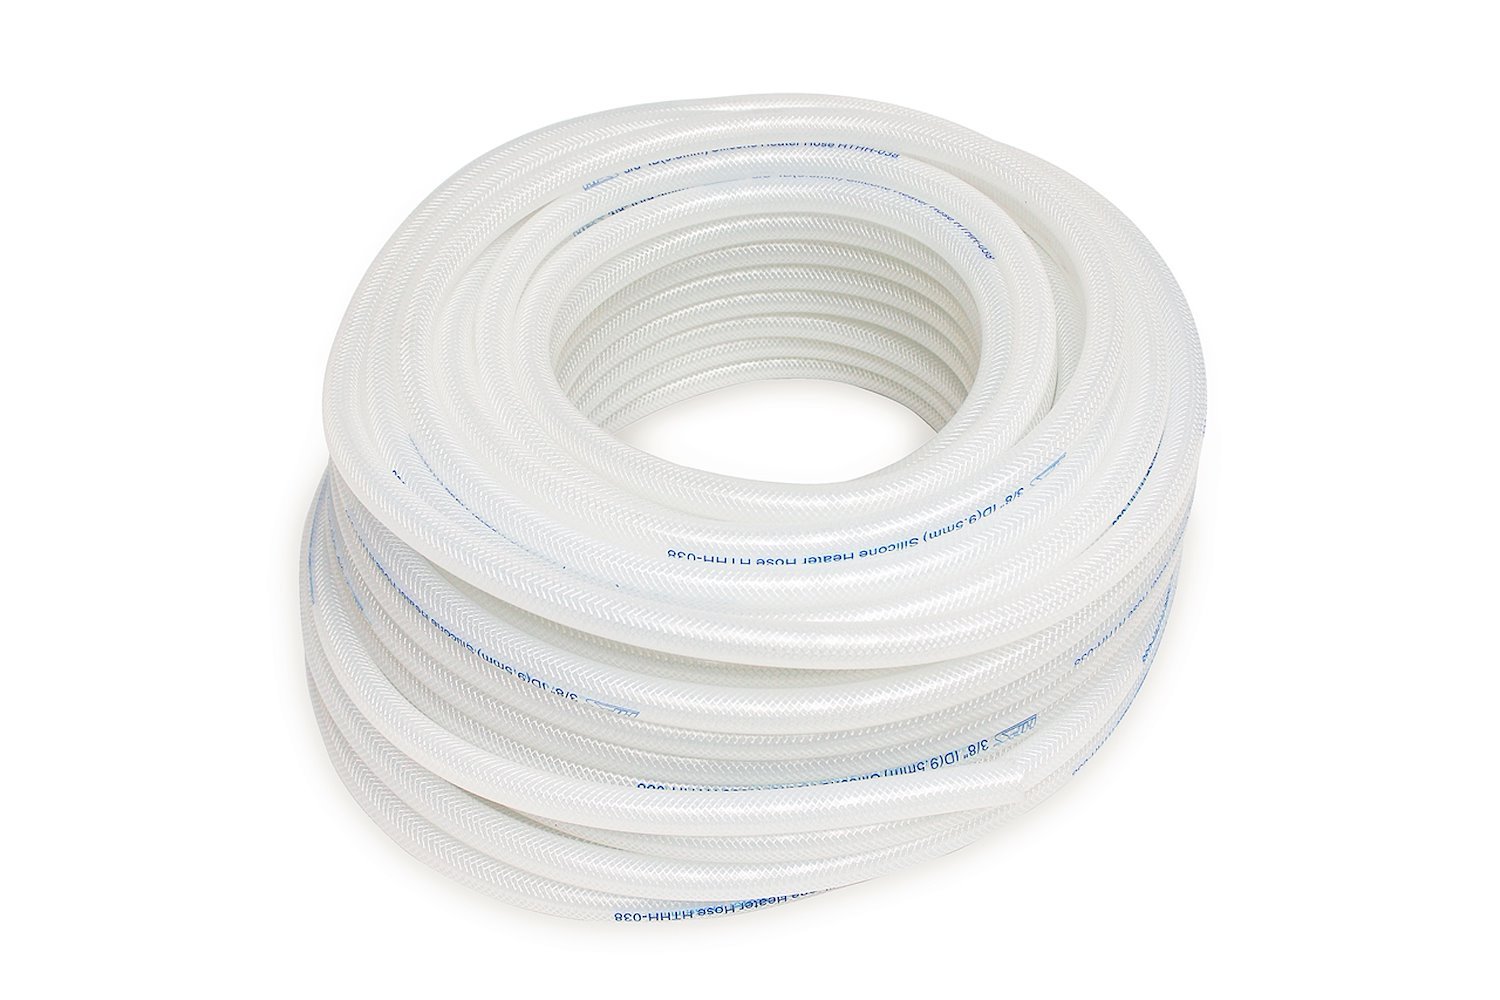 HTHH-032-CLEARx100 Silicone Heater Hose Tubing, High-Temp Reinforced, 5/16 in. ID, 100 ft. Roll, Clear